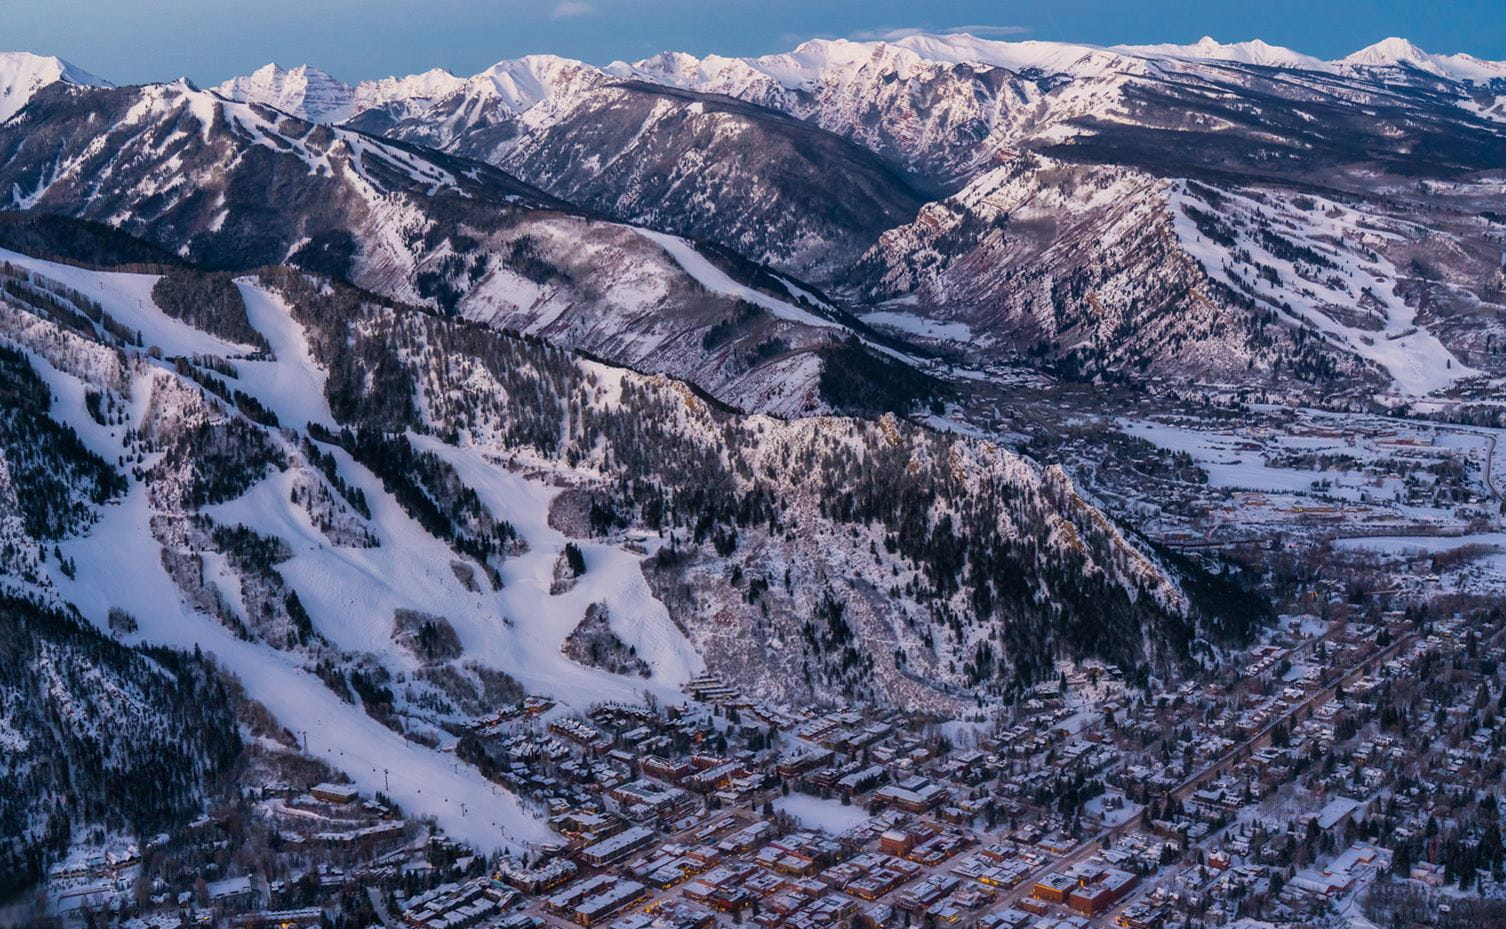 Overlooking the four mountains of Aspen Snowmass at sunrise